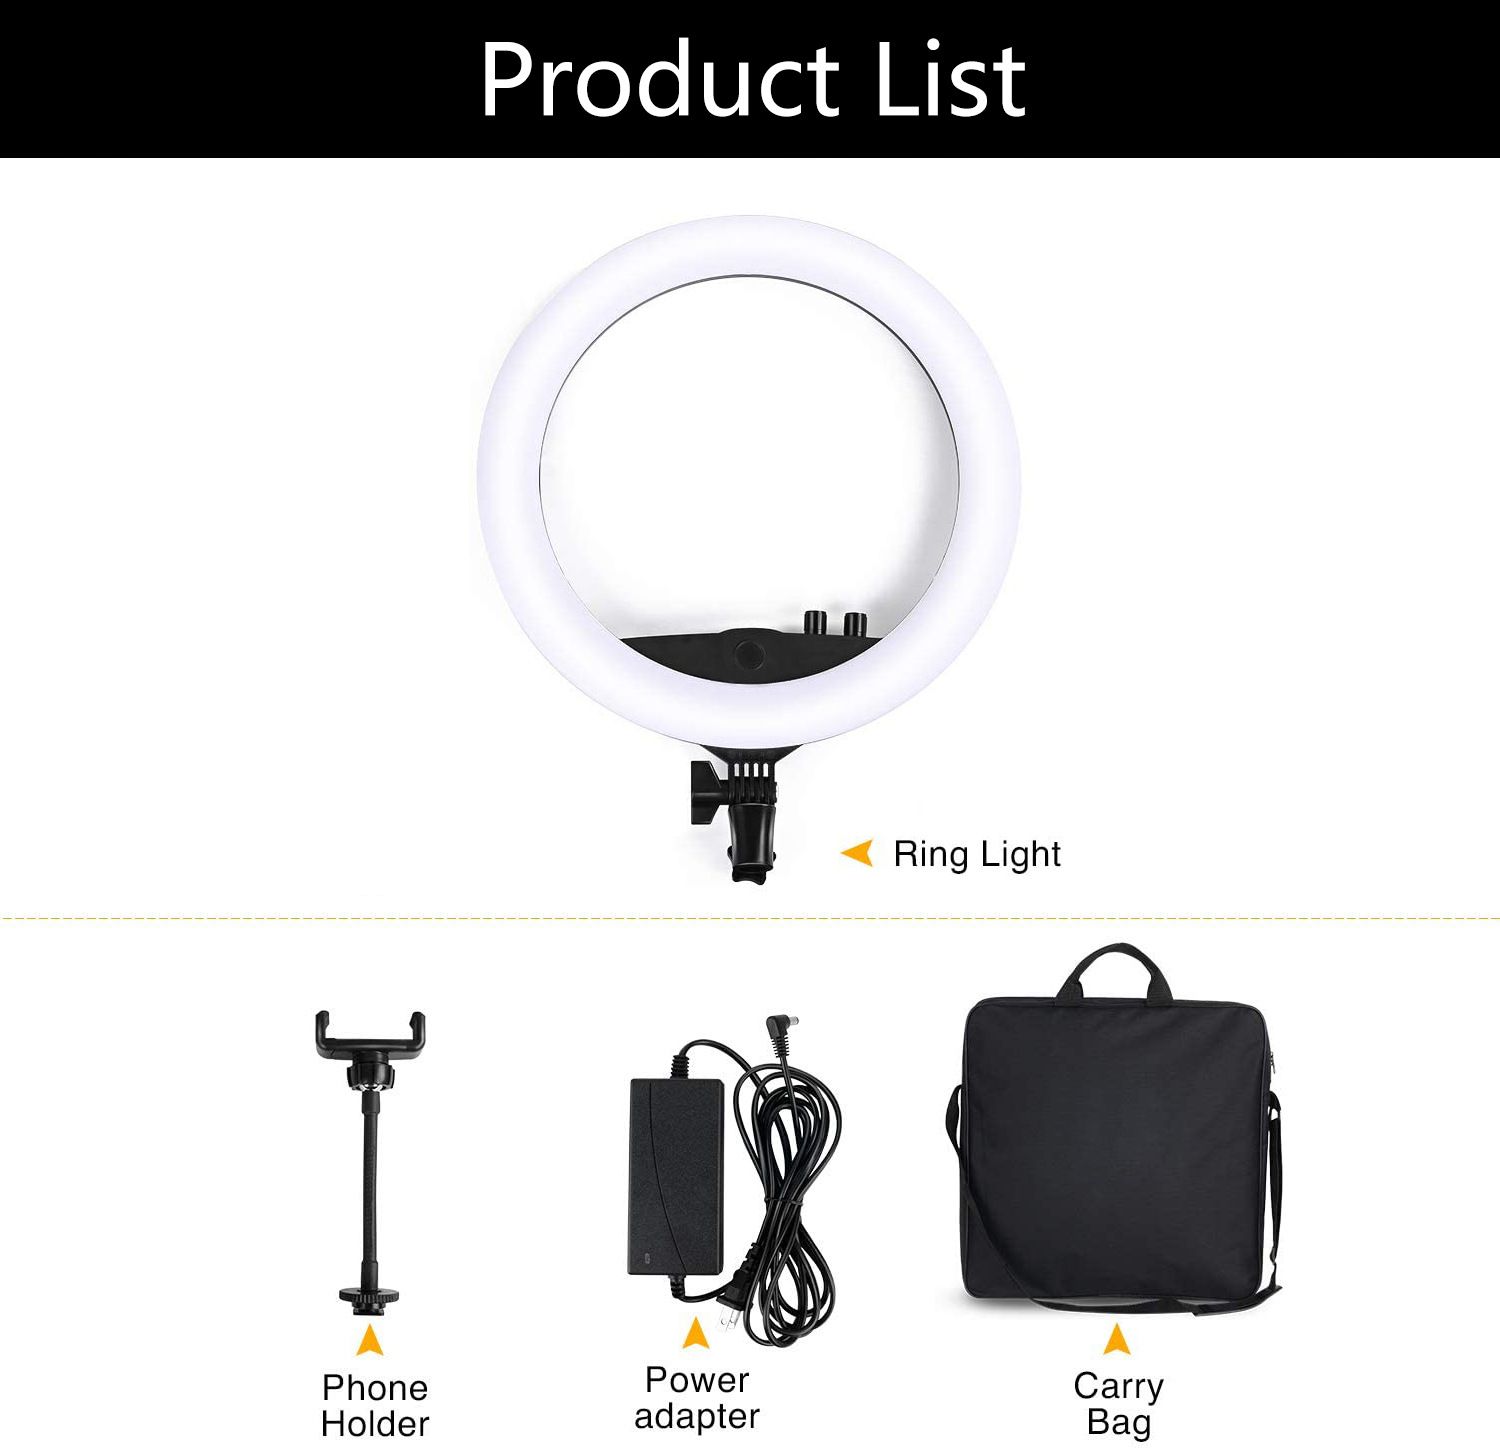 Mcoplus-LE-620B-02-24W-3200-5500K-14inch-Dimmable-LED-Selfie-Ring-Light-Photography-Video-Fill-Light-1731938